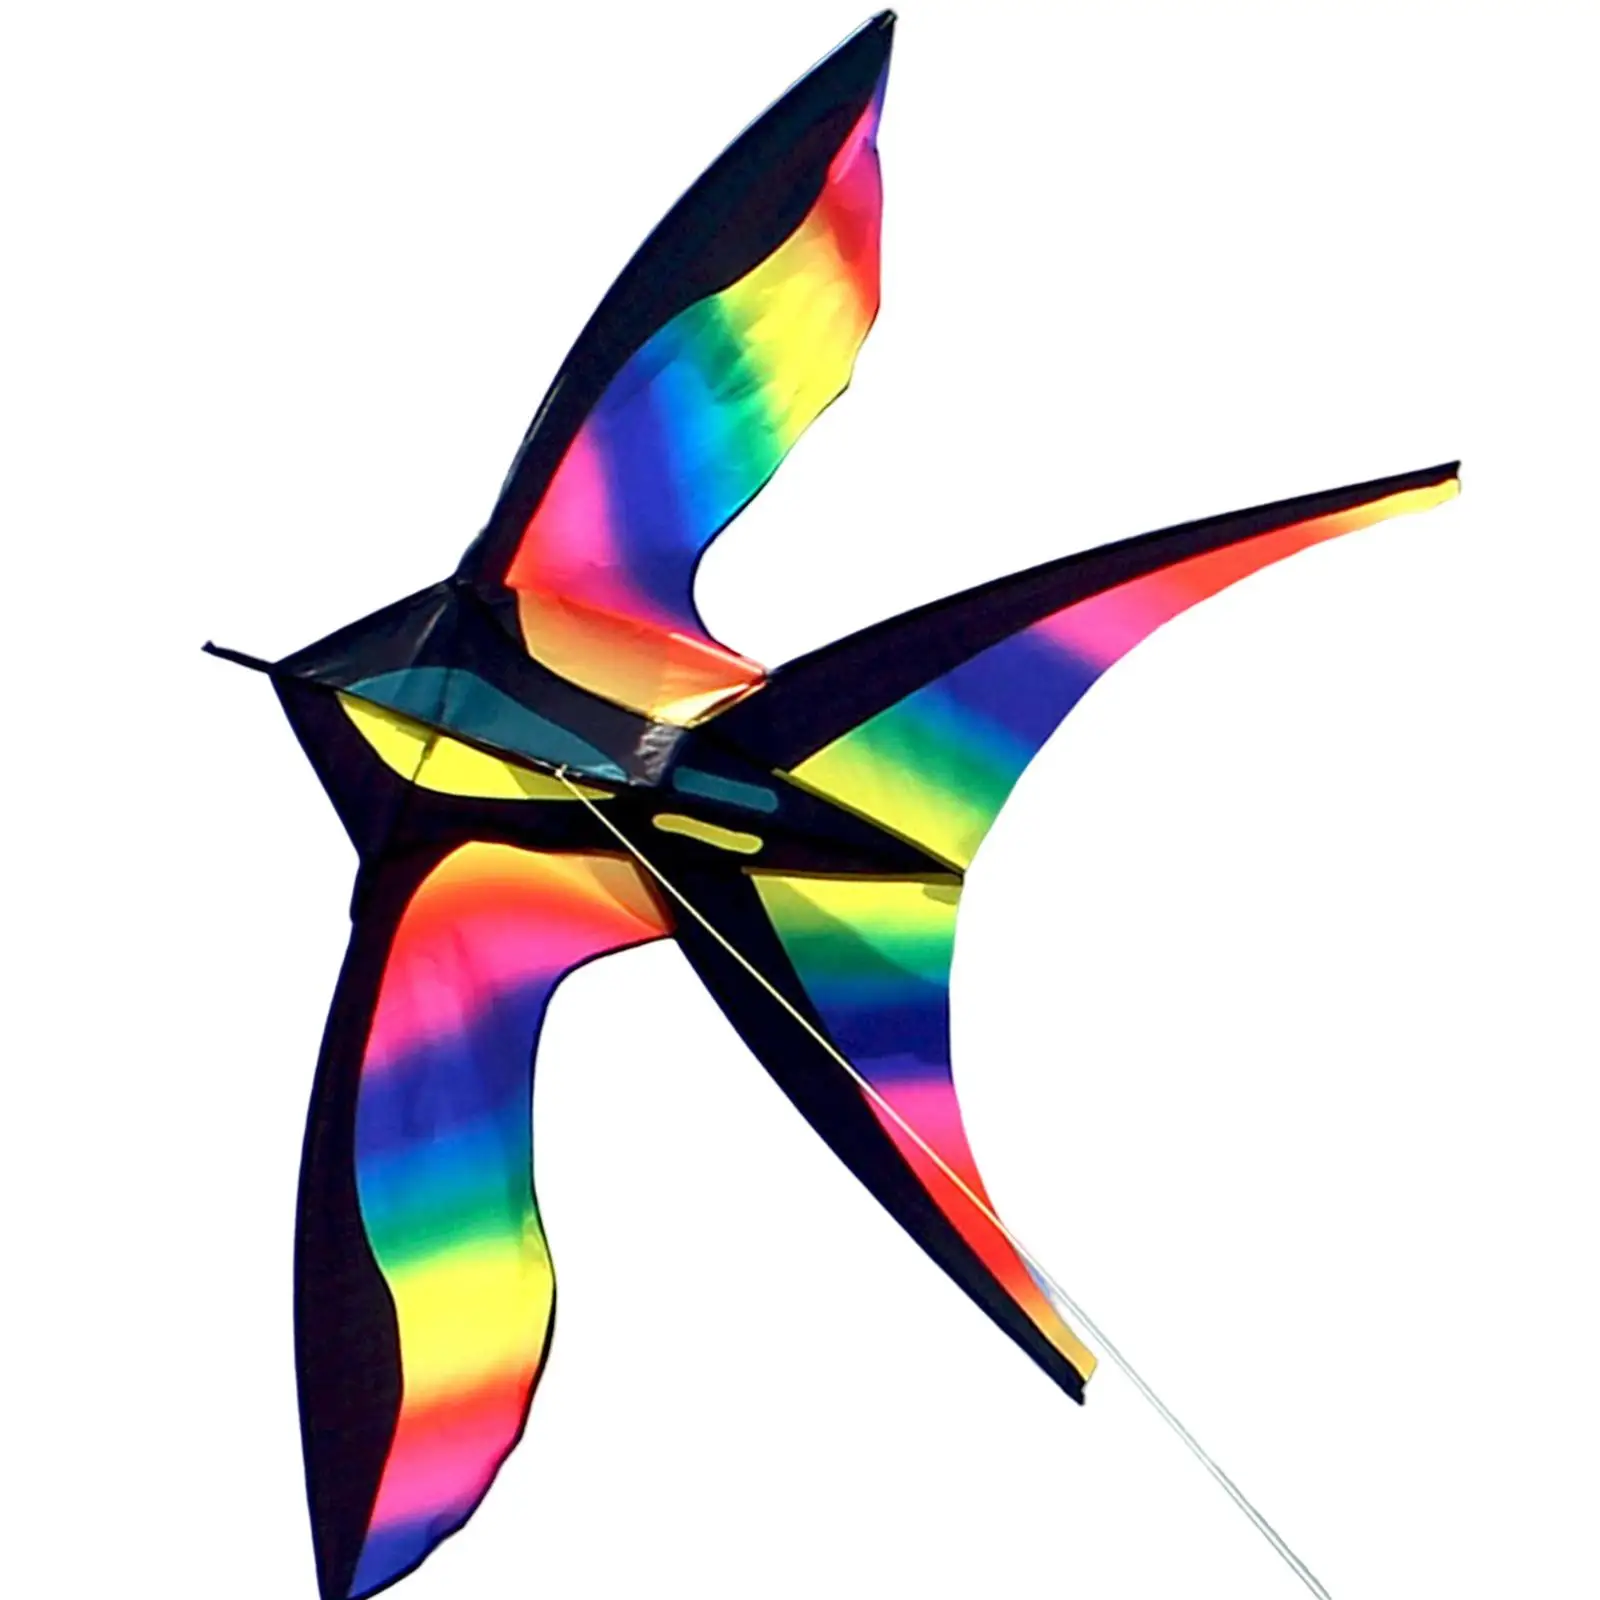 Giant Bird Kite Swallow Kite Single Line with String Huge Wingspan Easy to Fly Rainbow for Toy Beach Games Kids Adults Beginner